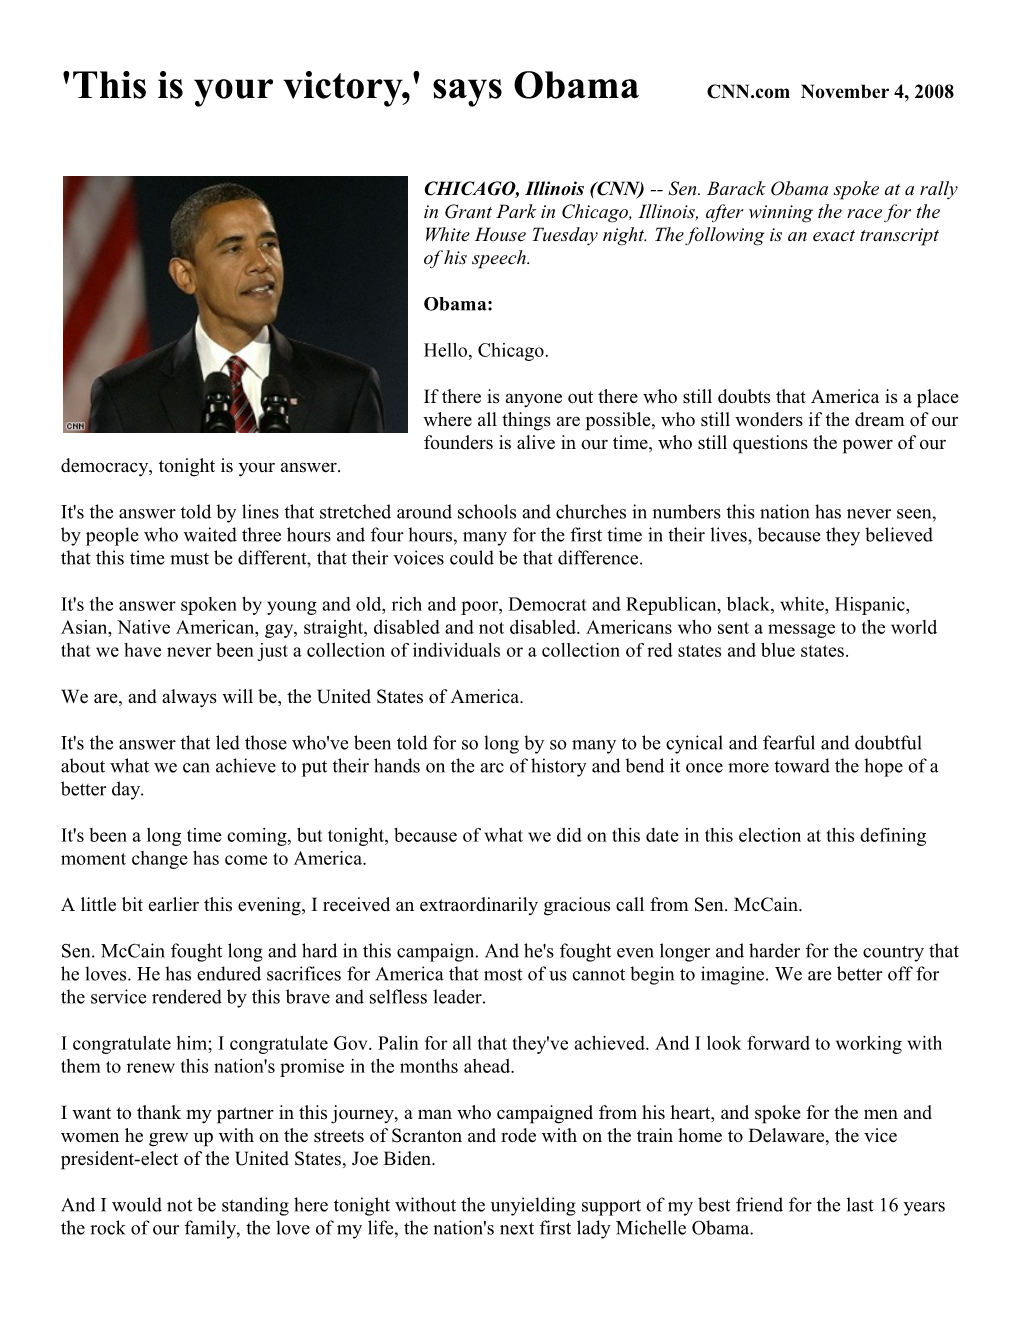 'This Is Your Victory,' Says Obama CNN.Com November 4, 2008